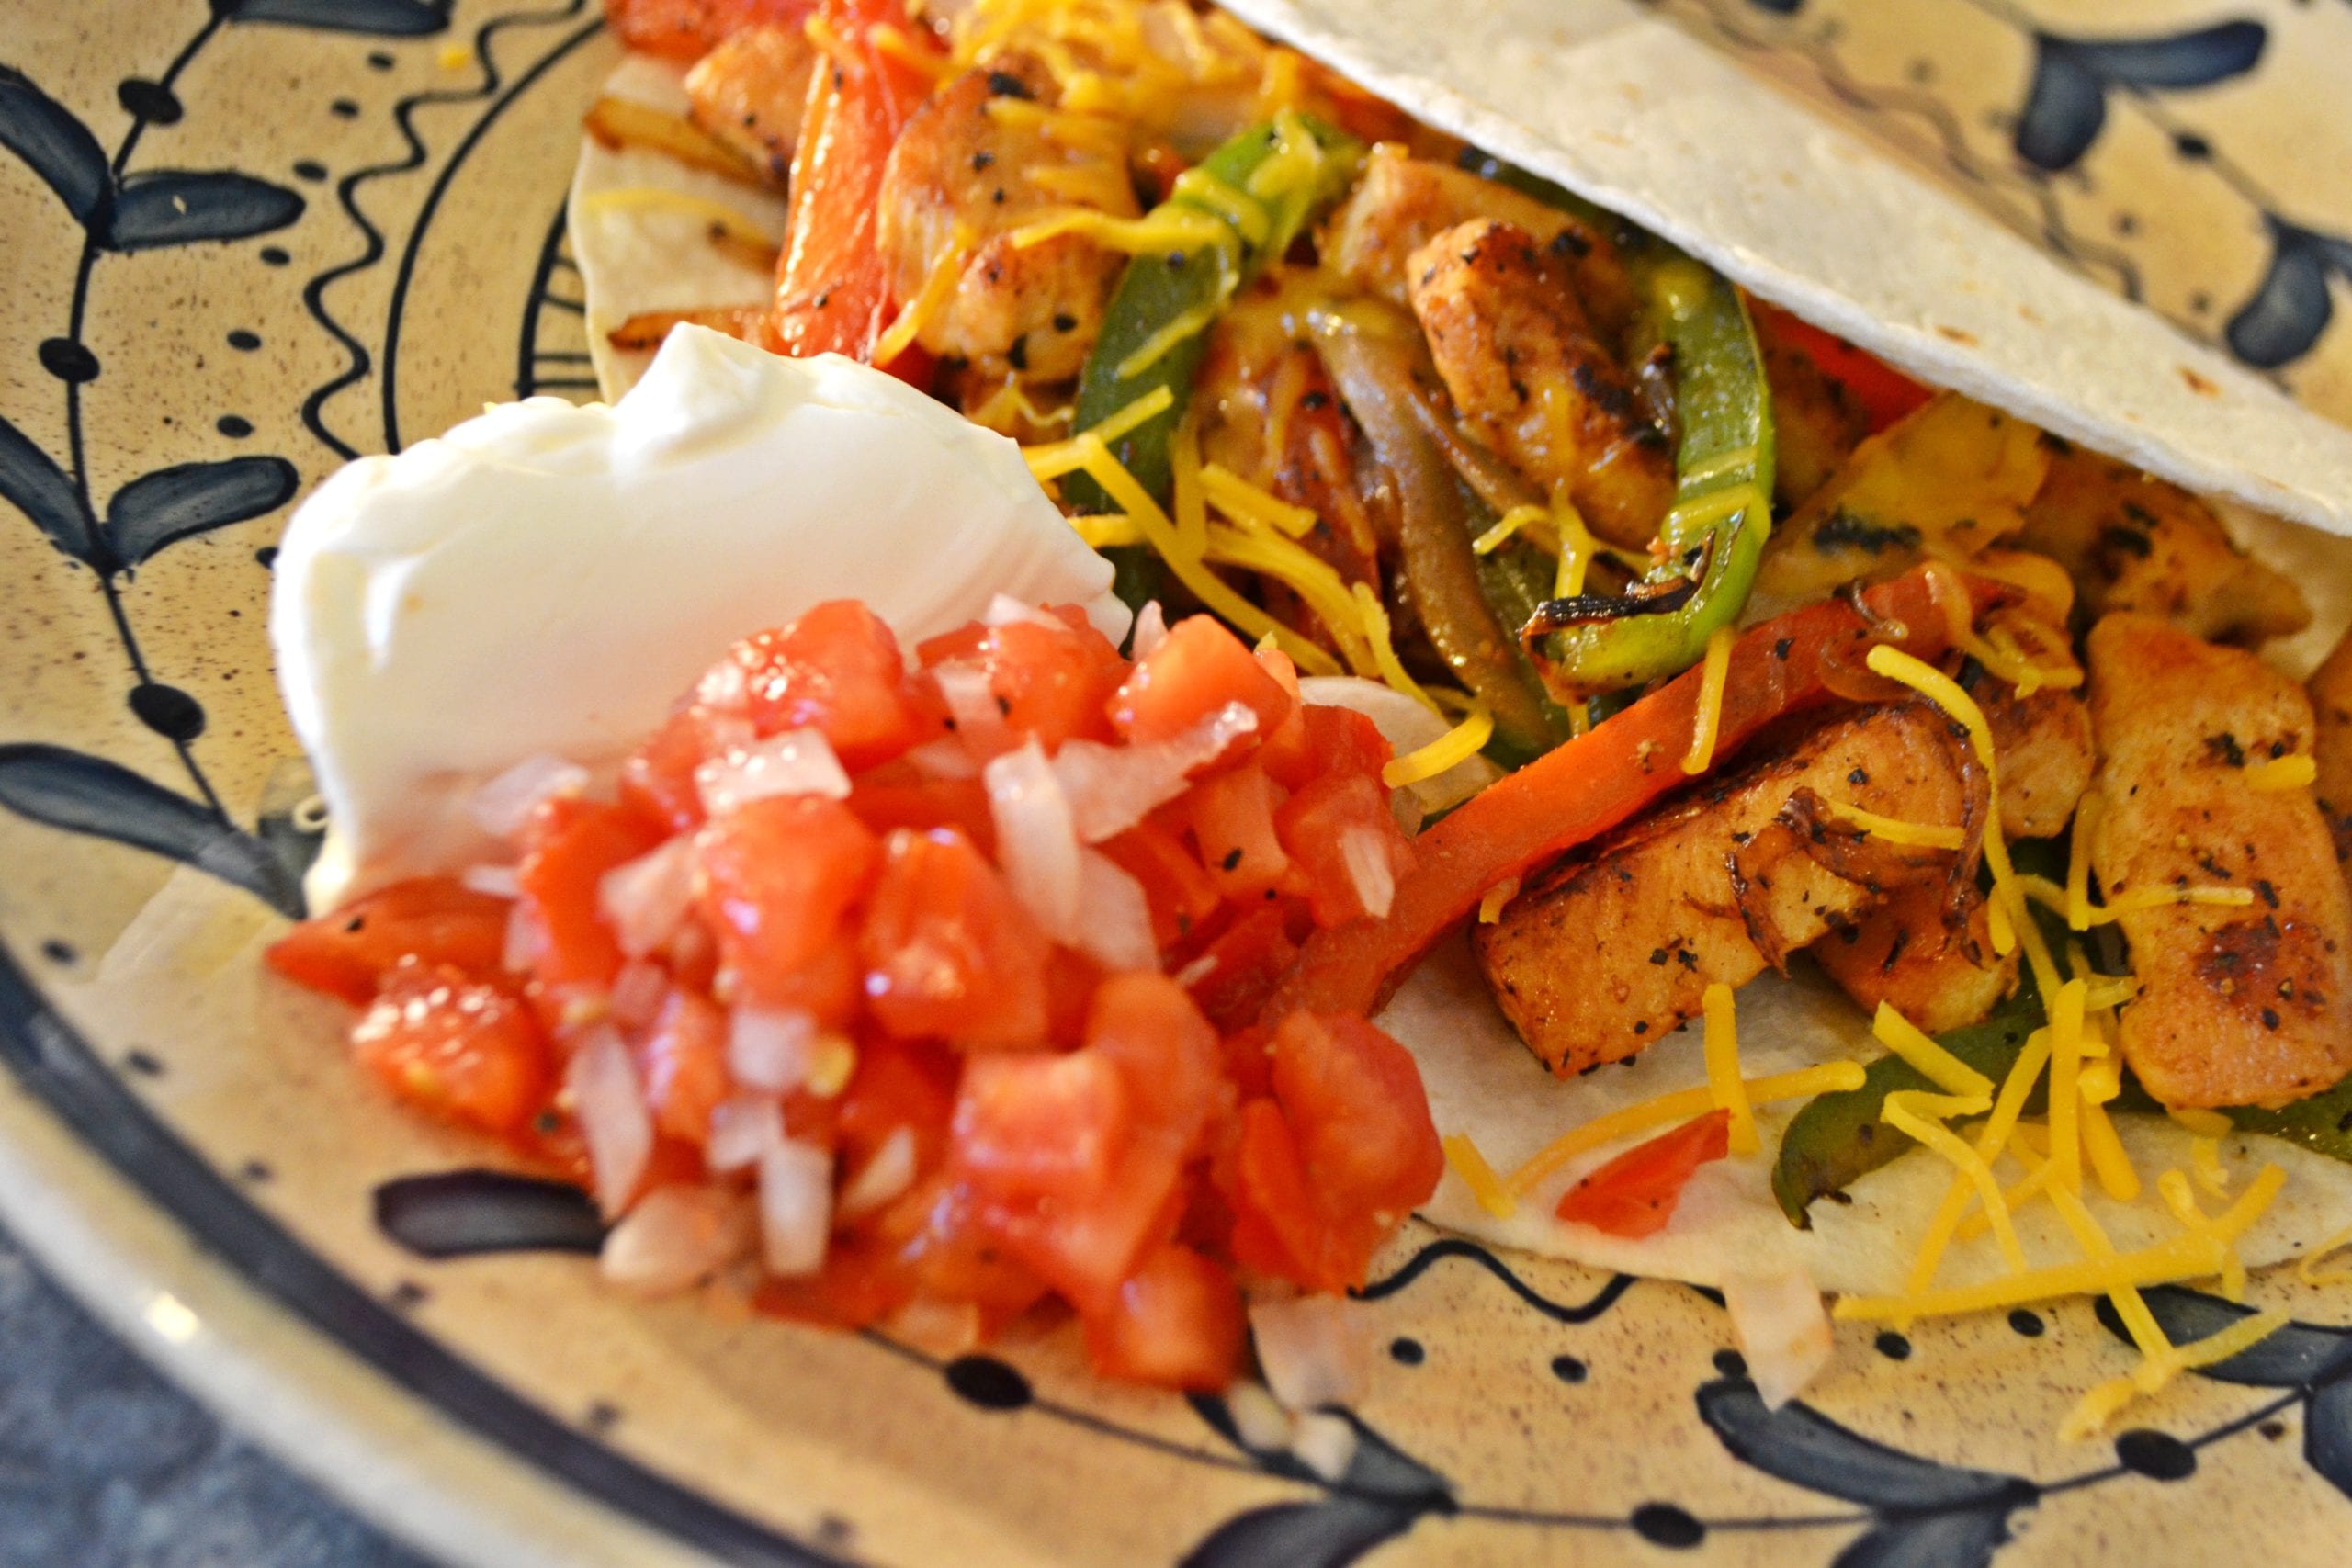 Fajita on a plate with a side of sour cream and salsa